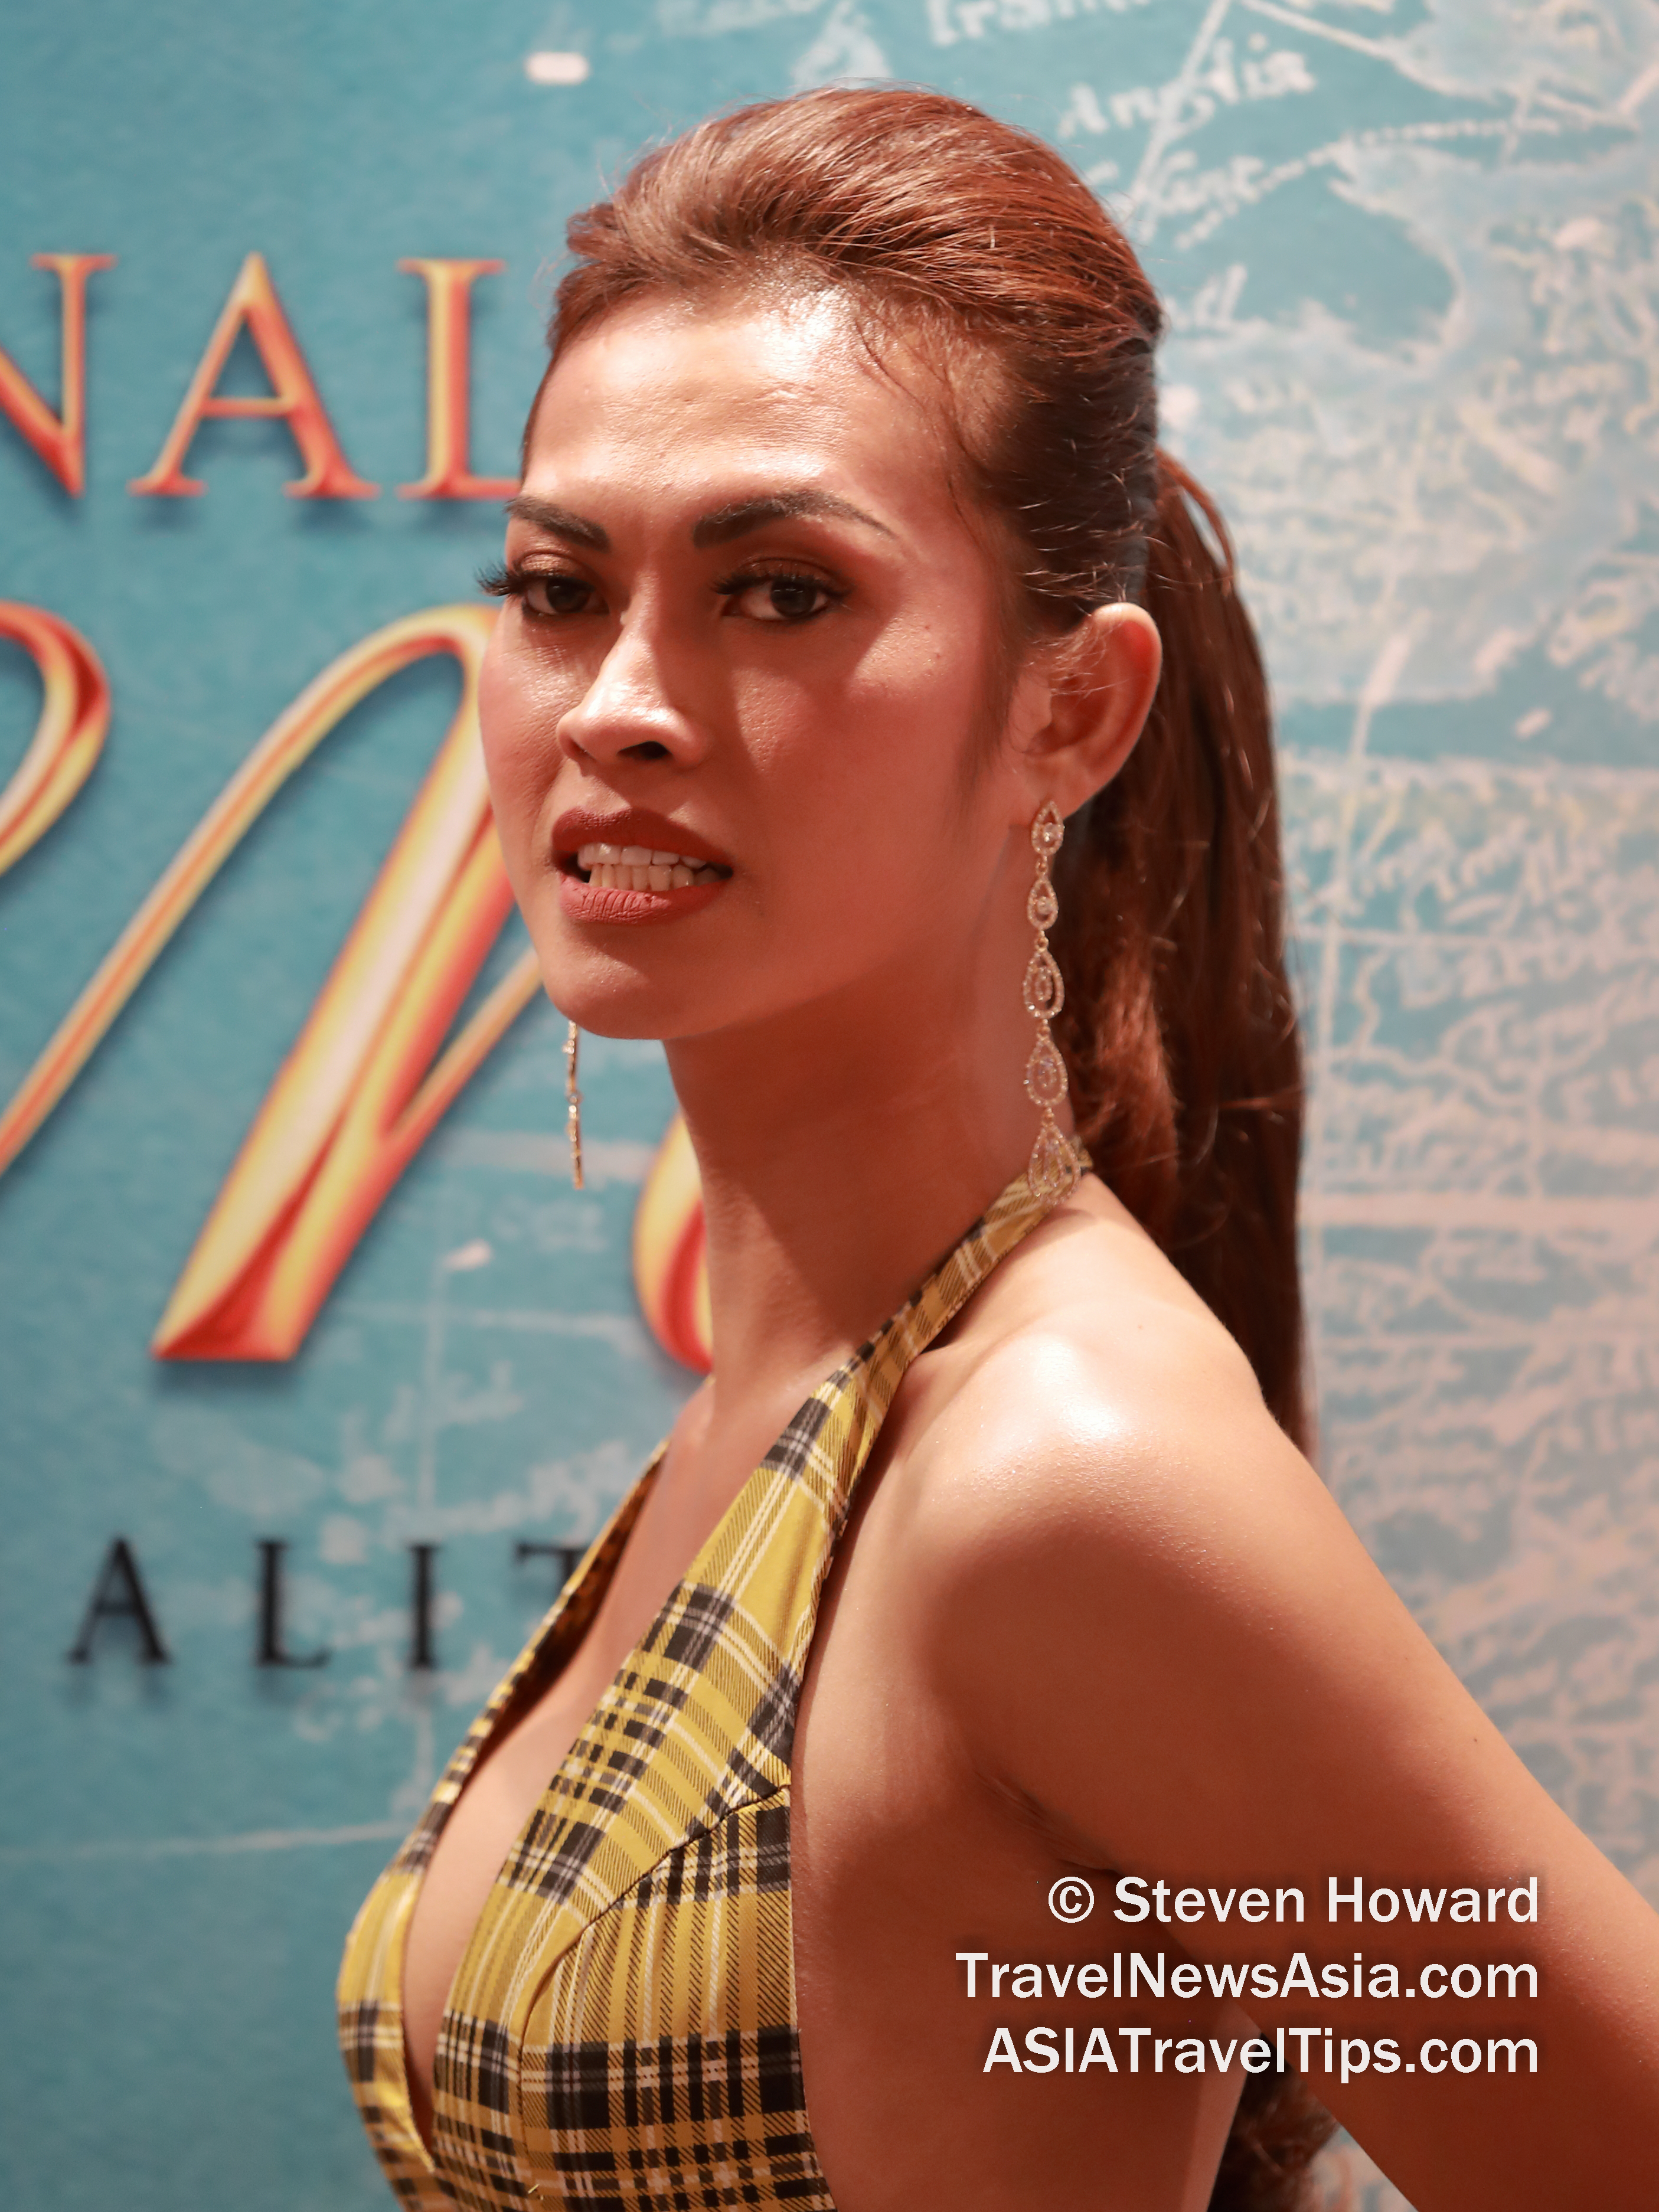 Pictures of Miss International Queen 2019 at Tiffany's Show Pattaya, Thailand